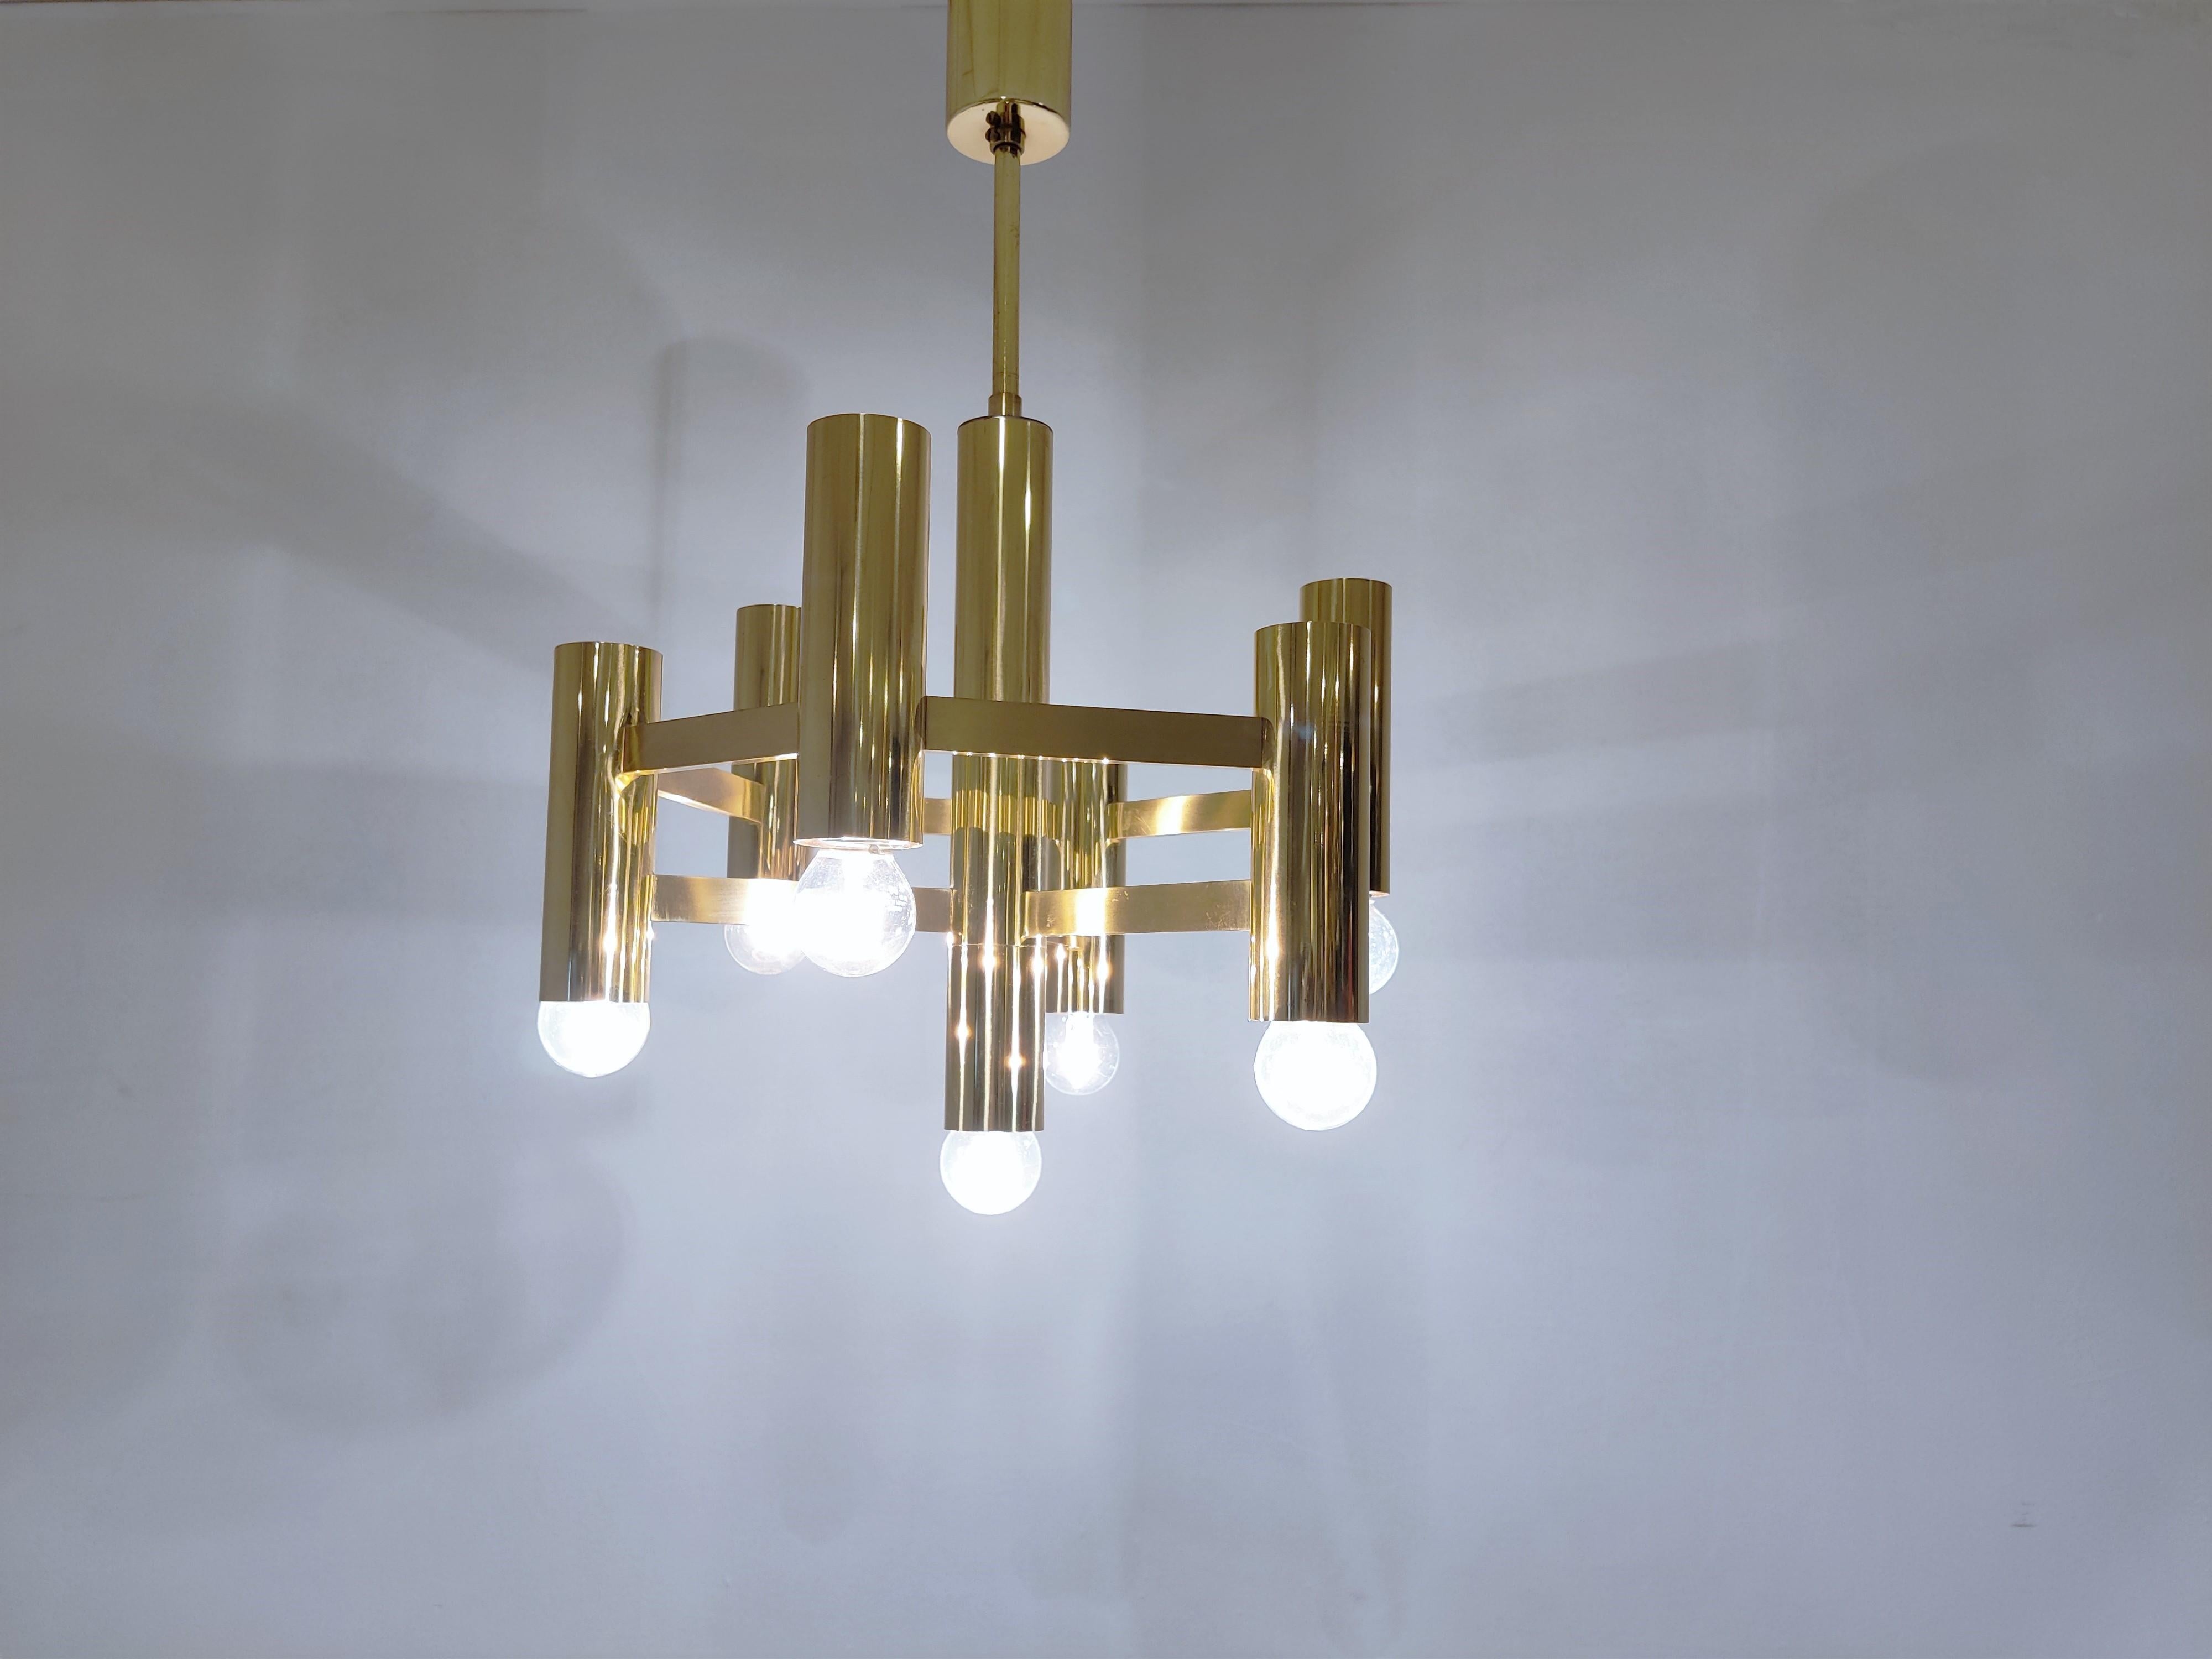 Tubular brass Gaetano Sciolari chandelier with 7 lightpoints.

Produced by Boulanger SA in Belgium

The chandelier is in very good condition and in full working order.

Tested and ready for use, chandelier will work all around the